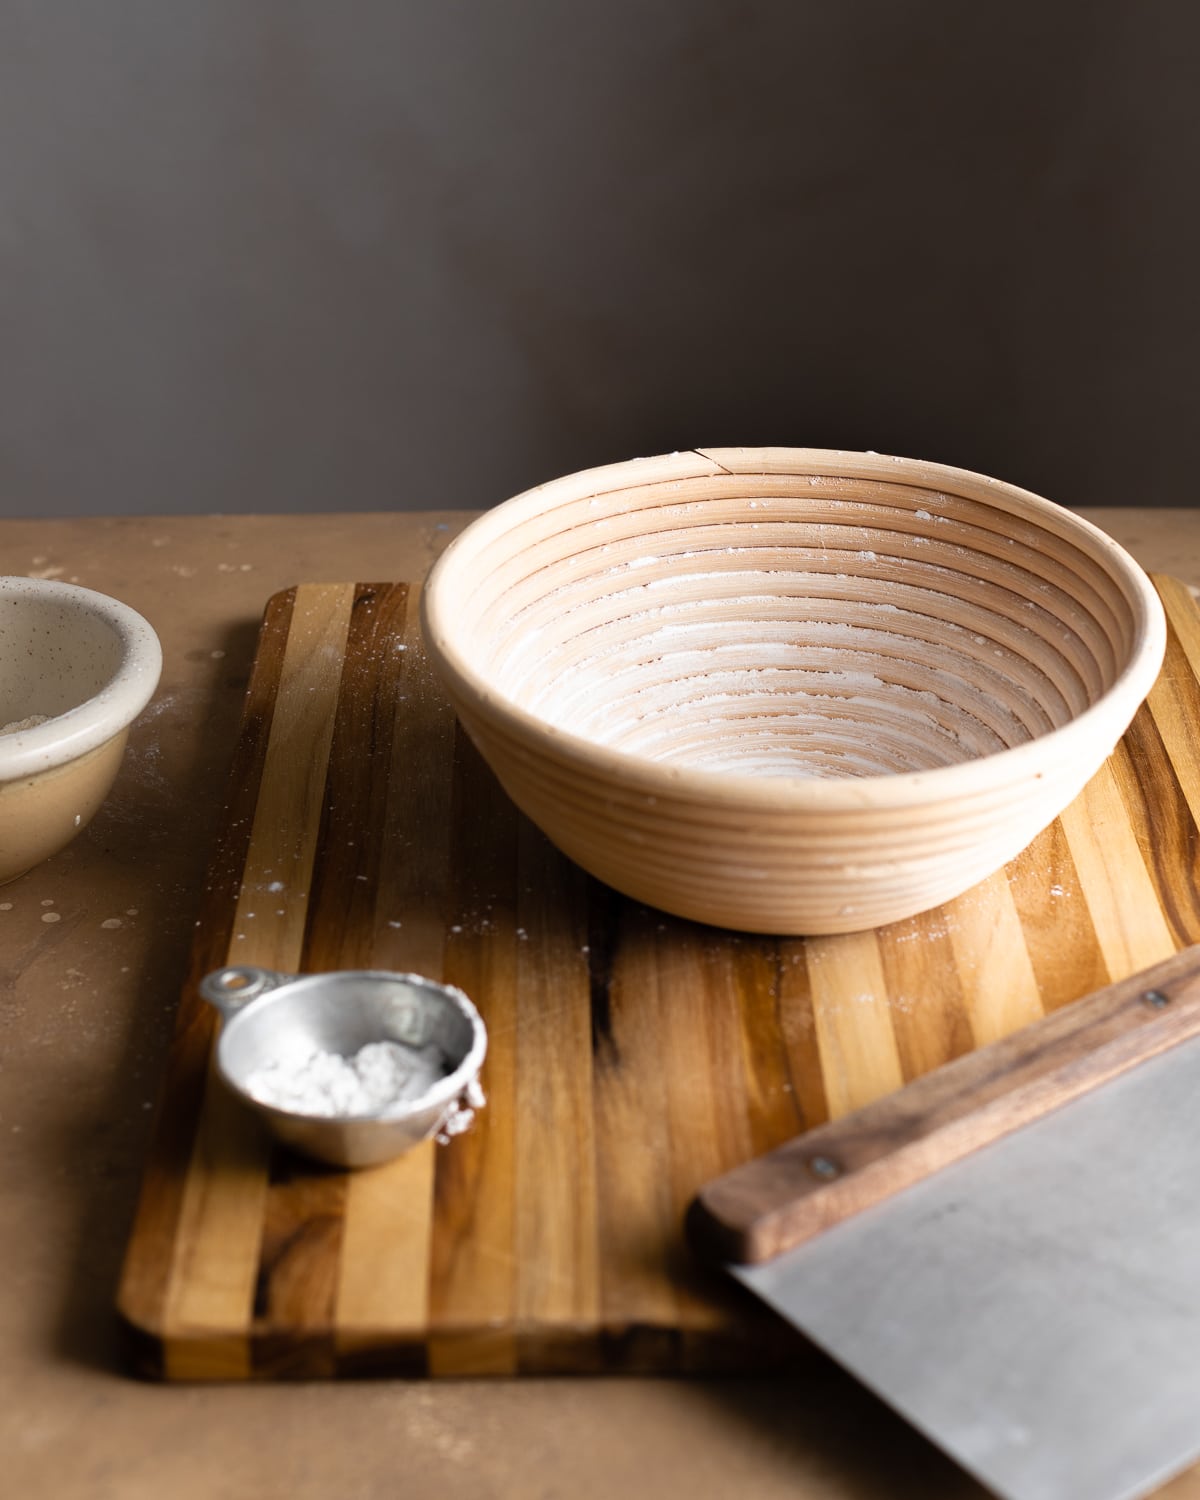 round wood banneton on a wooden cutting board with a bench knife and a metal cup with rice flour